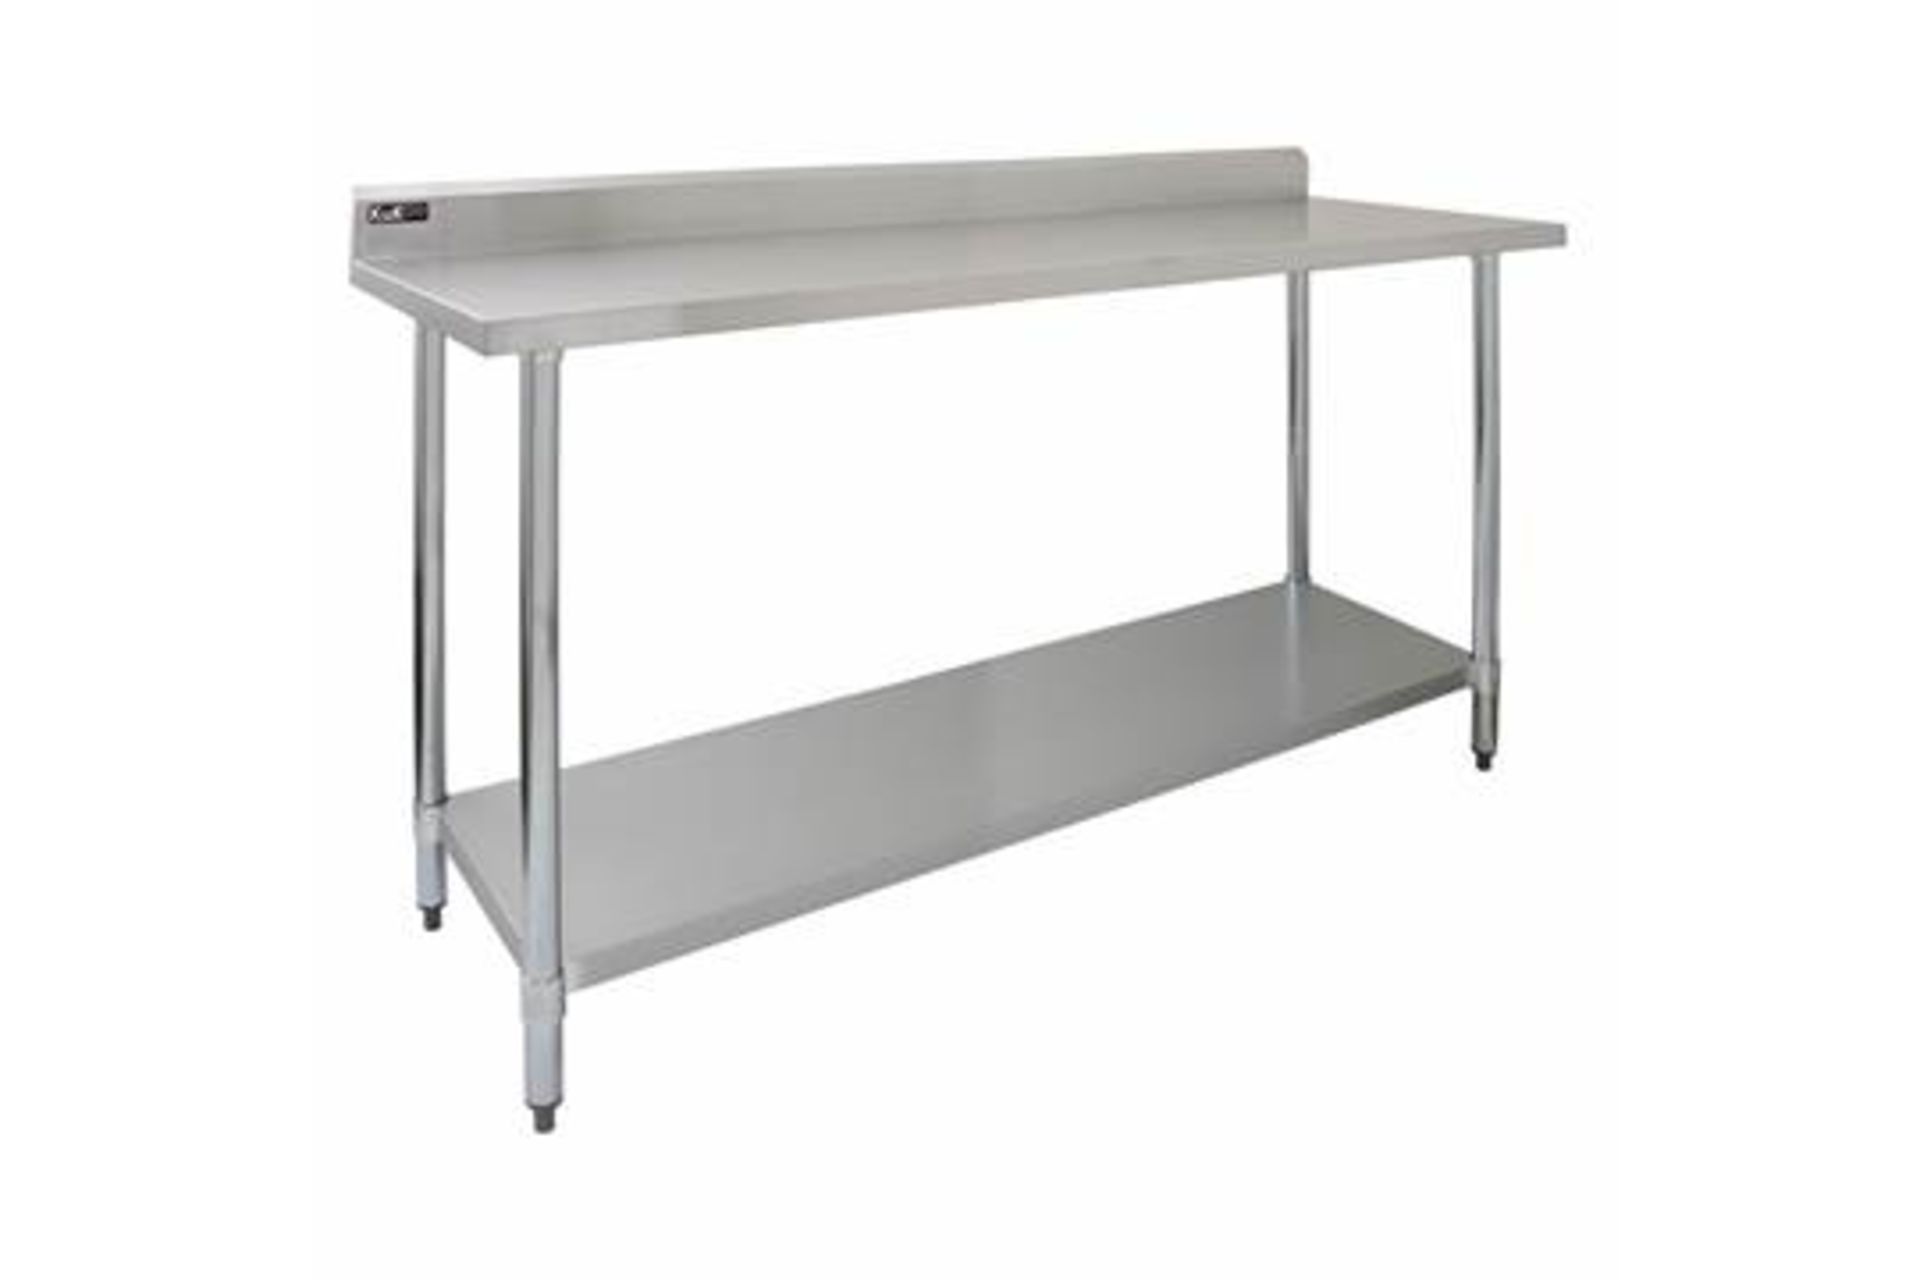 1 BOXED KUKOO 6FT METAL CATERING TABLE (NO LEGS) £175